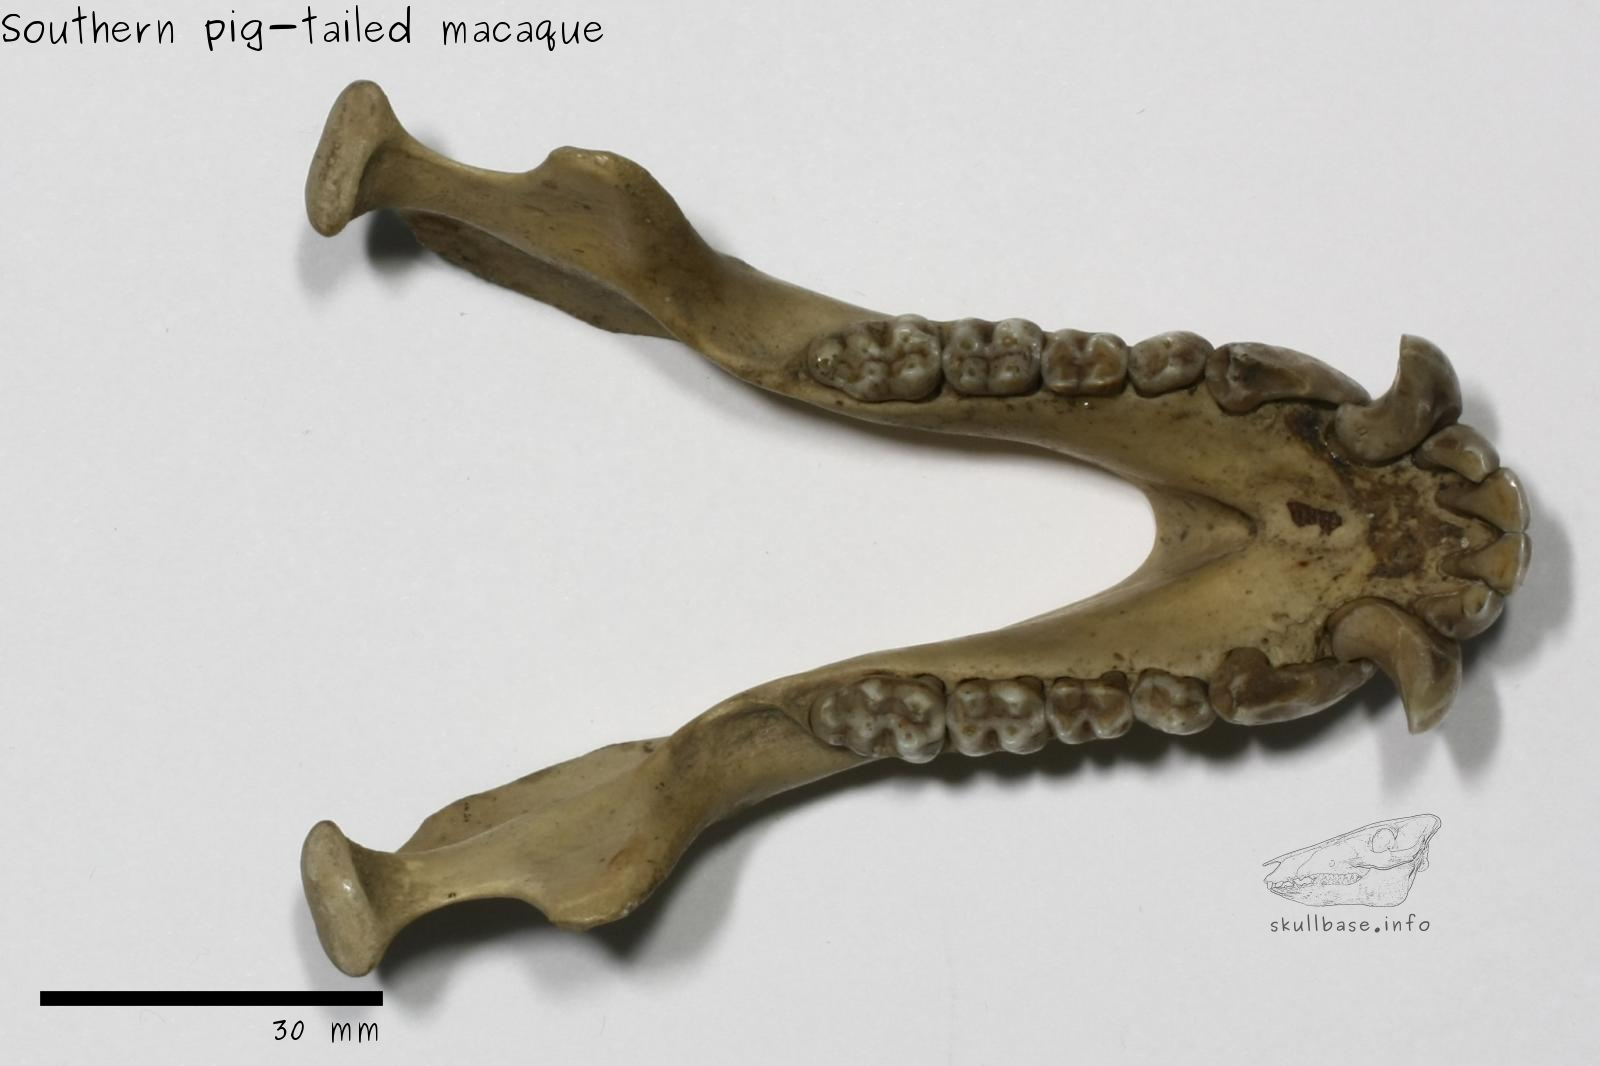 Southern pig-tailed macaque (Macaca nemestrina) jaw